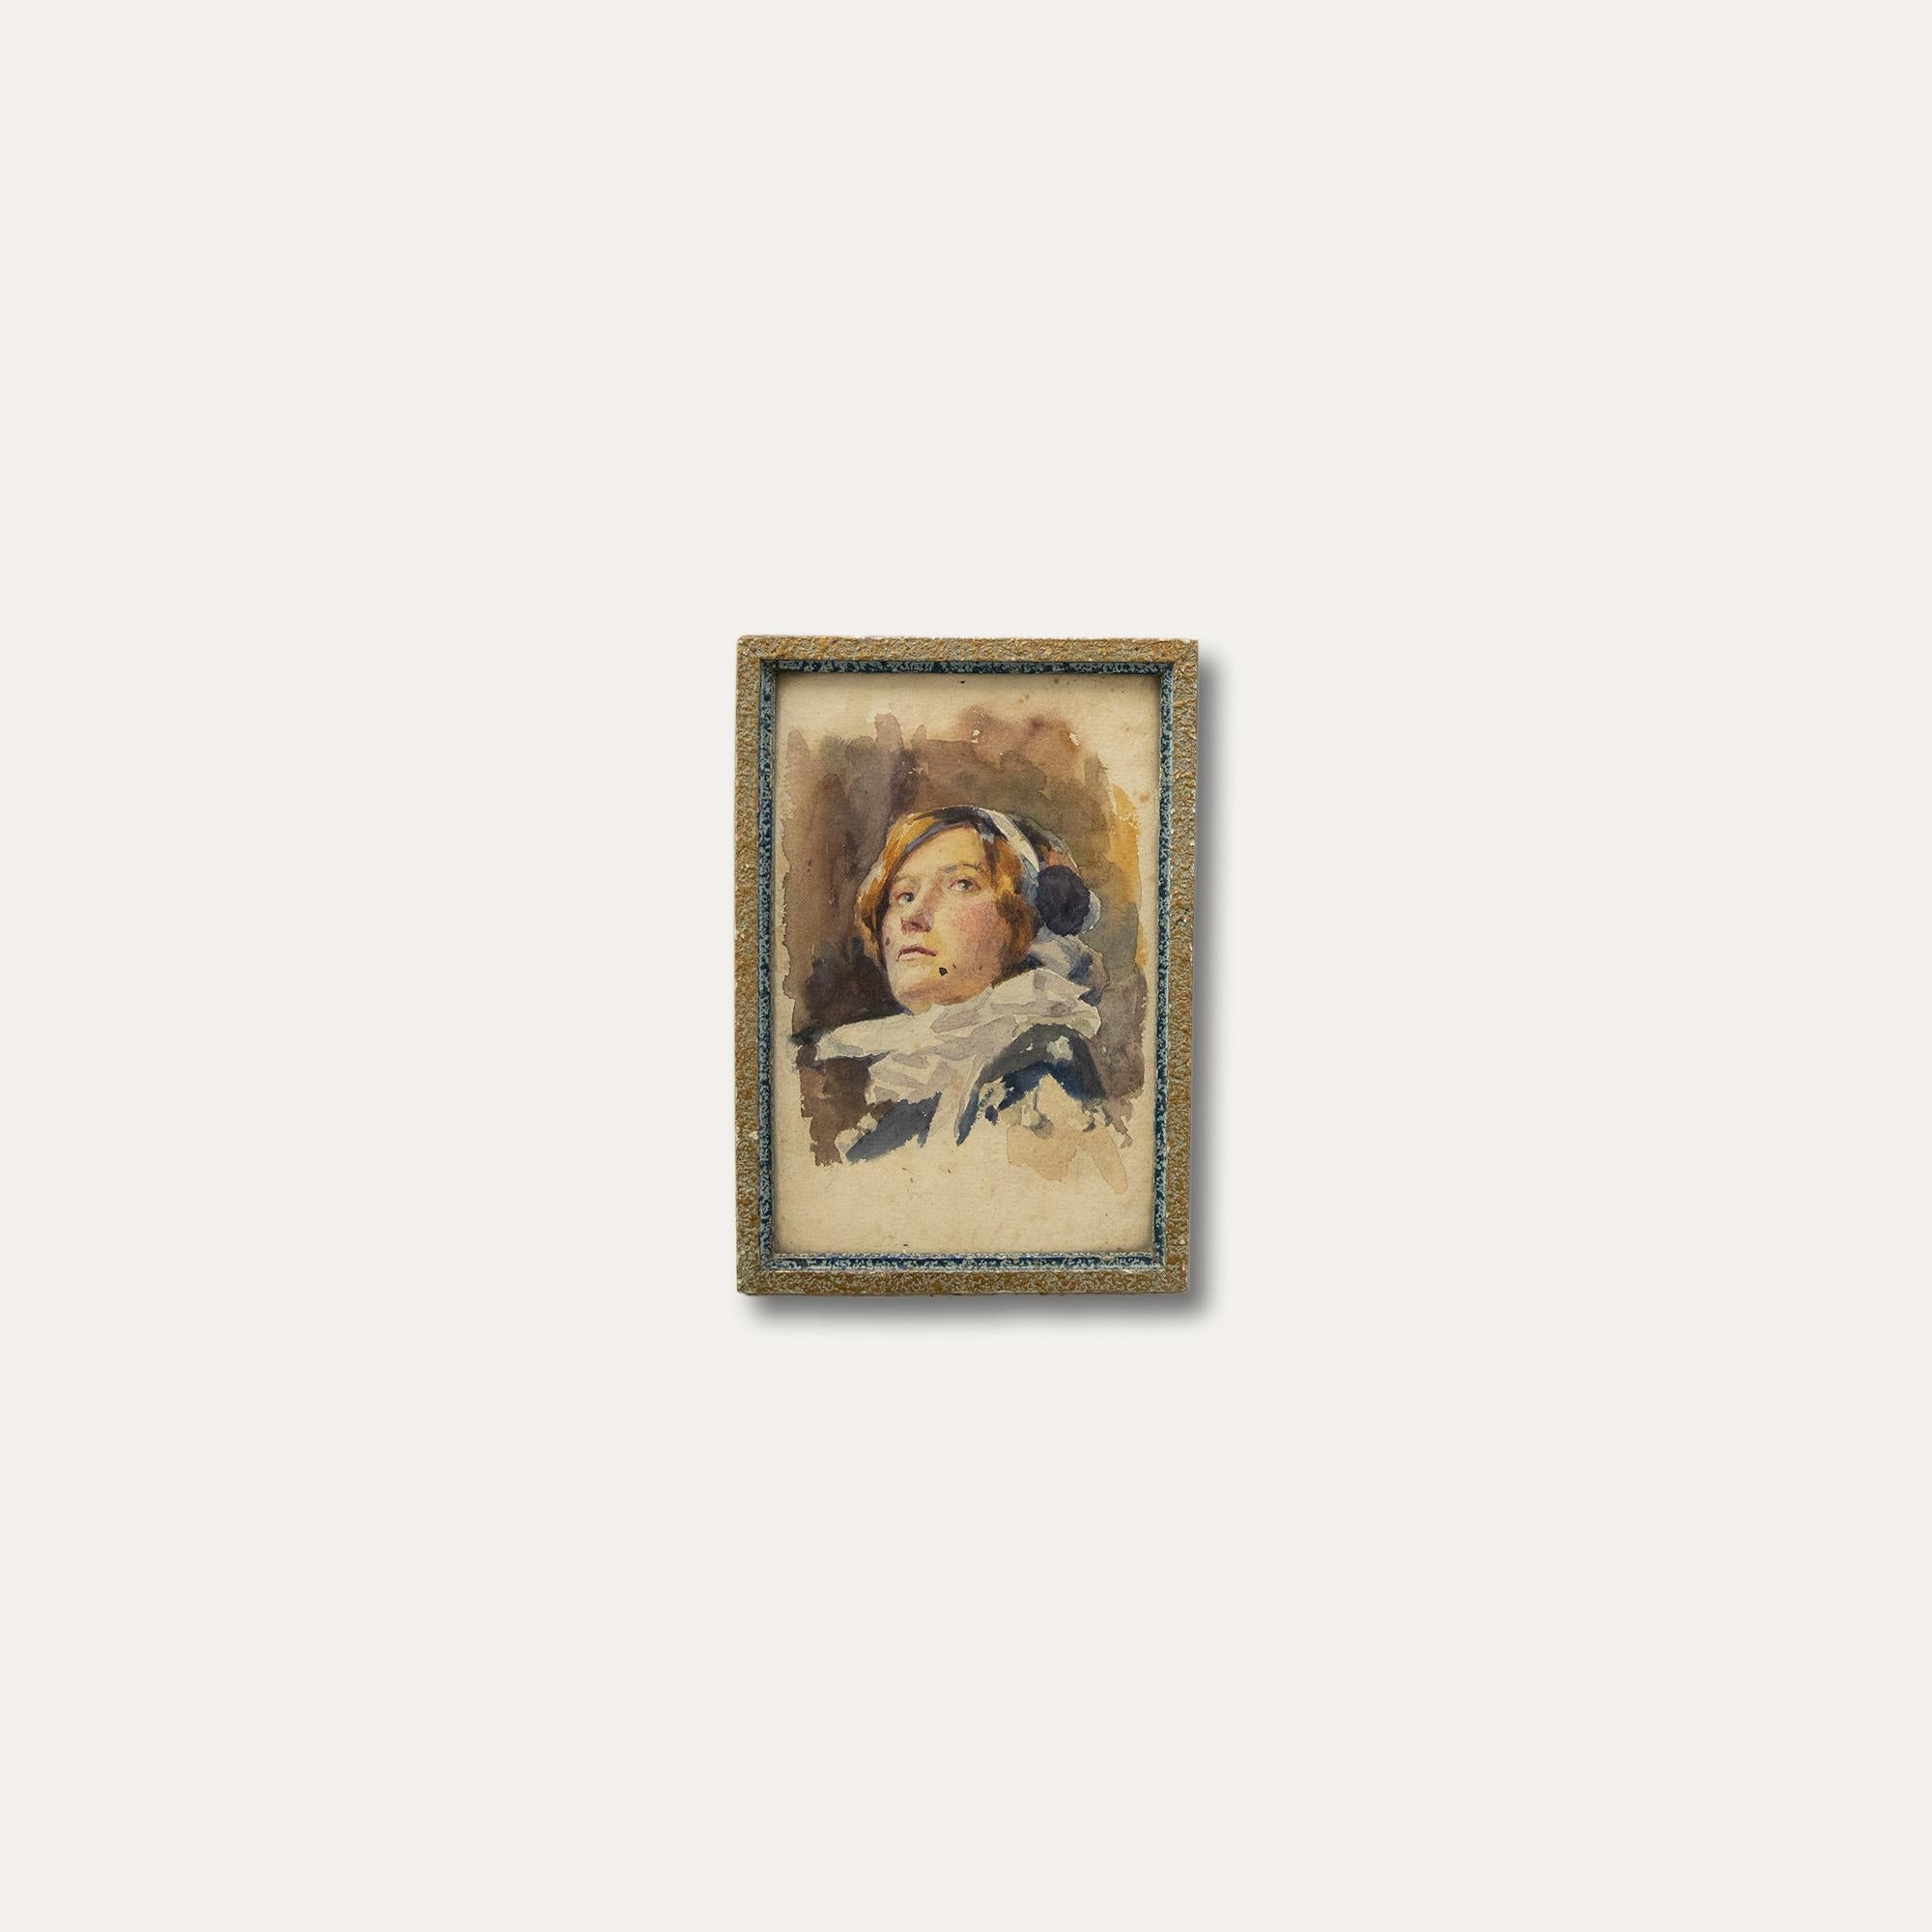 A charismatic watercolour portrait of an actress in costume. Presented in a fine gilt-effect frame with the artist name inscribed to the reverse. On paper.